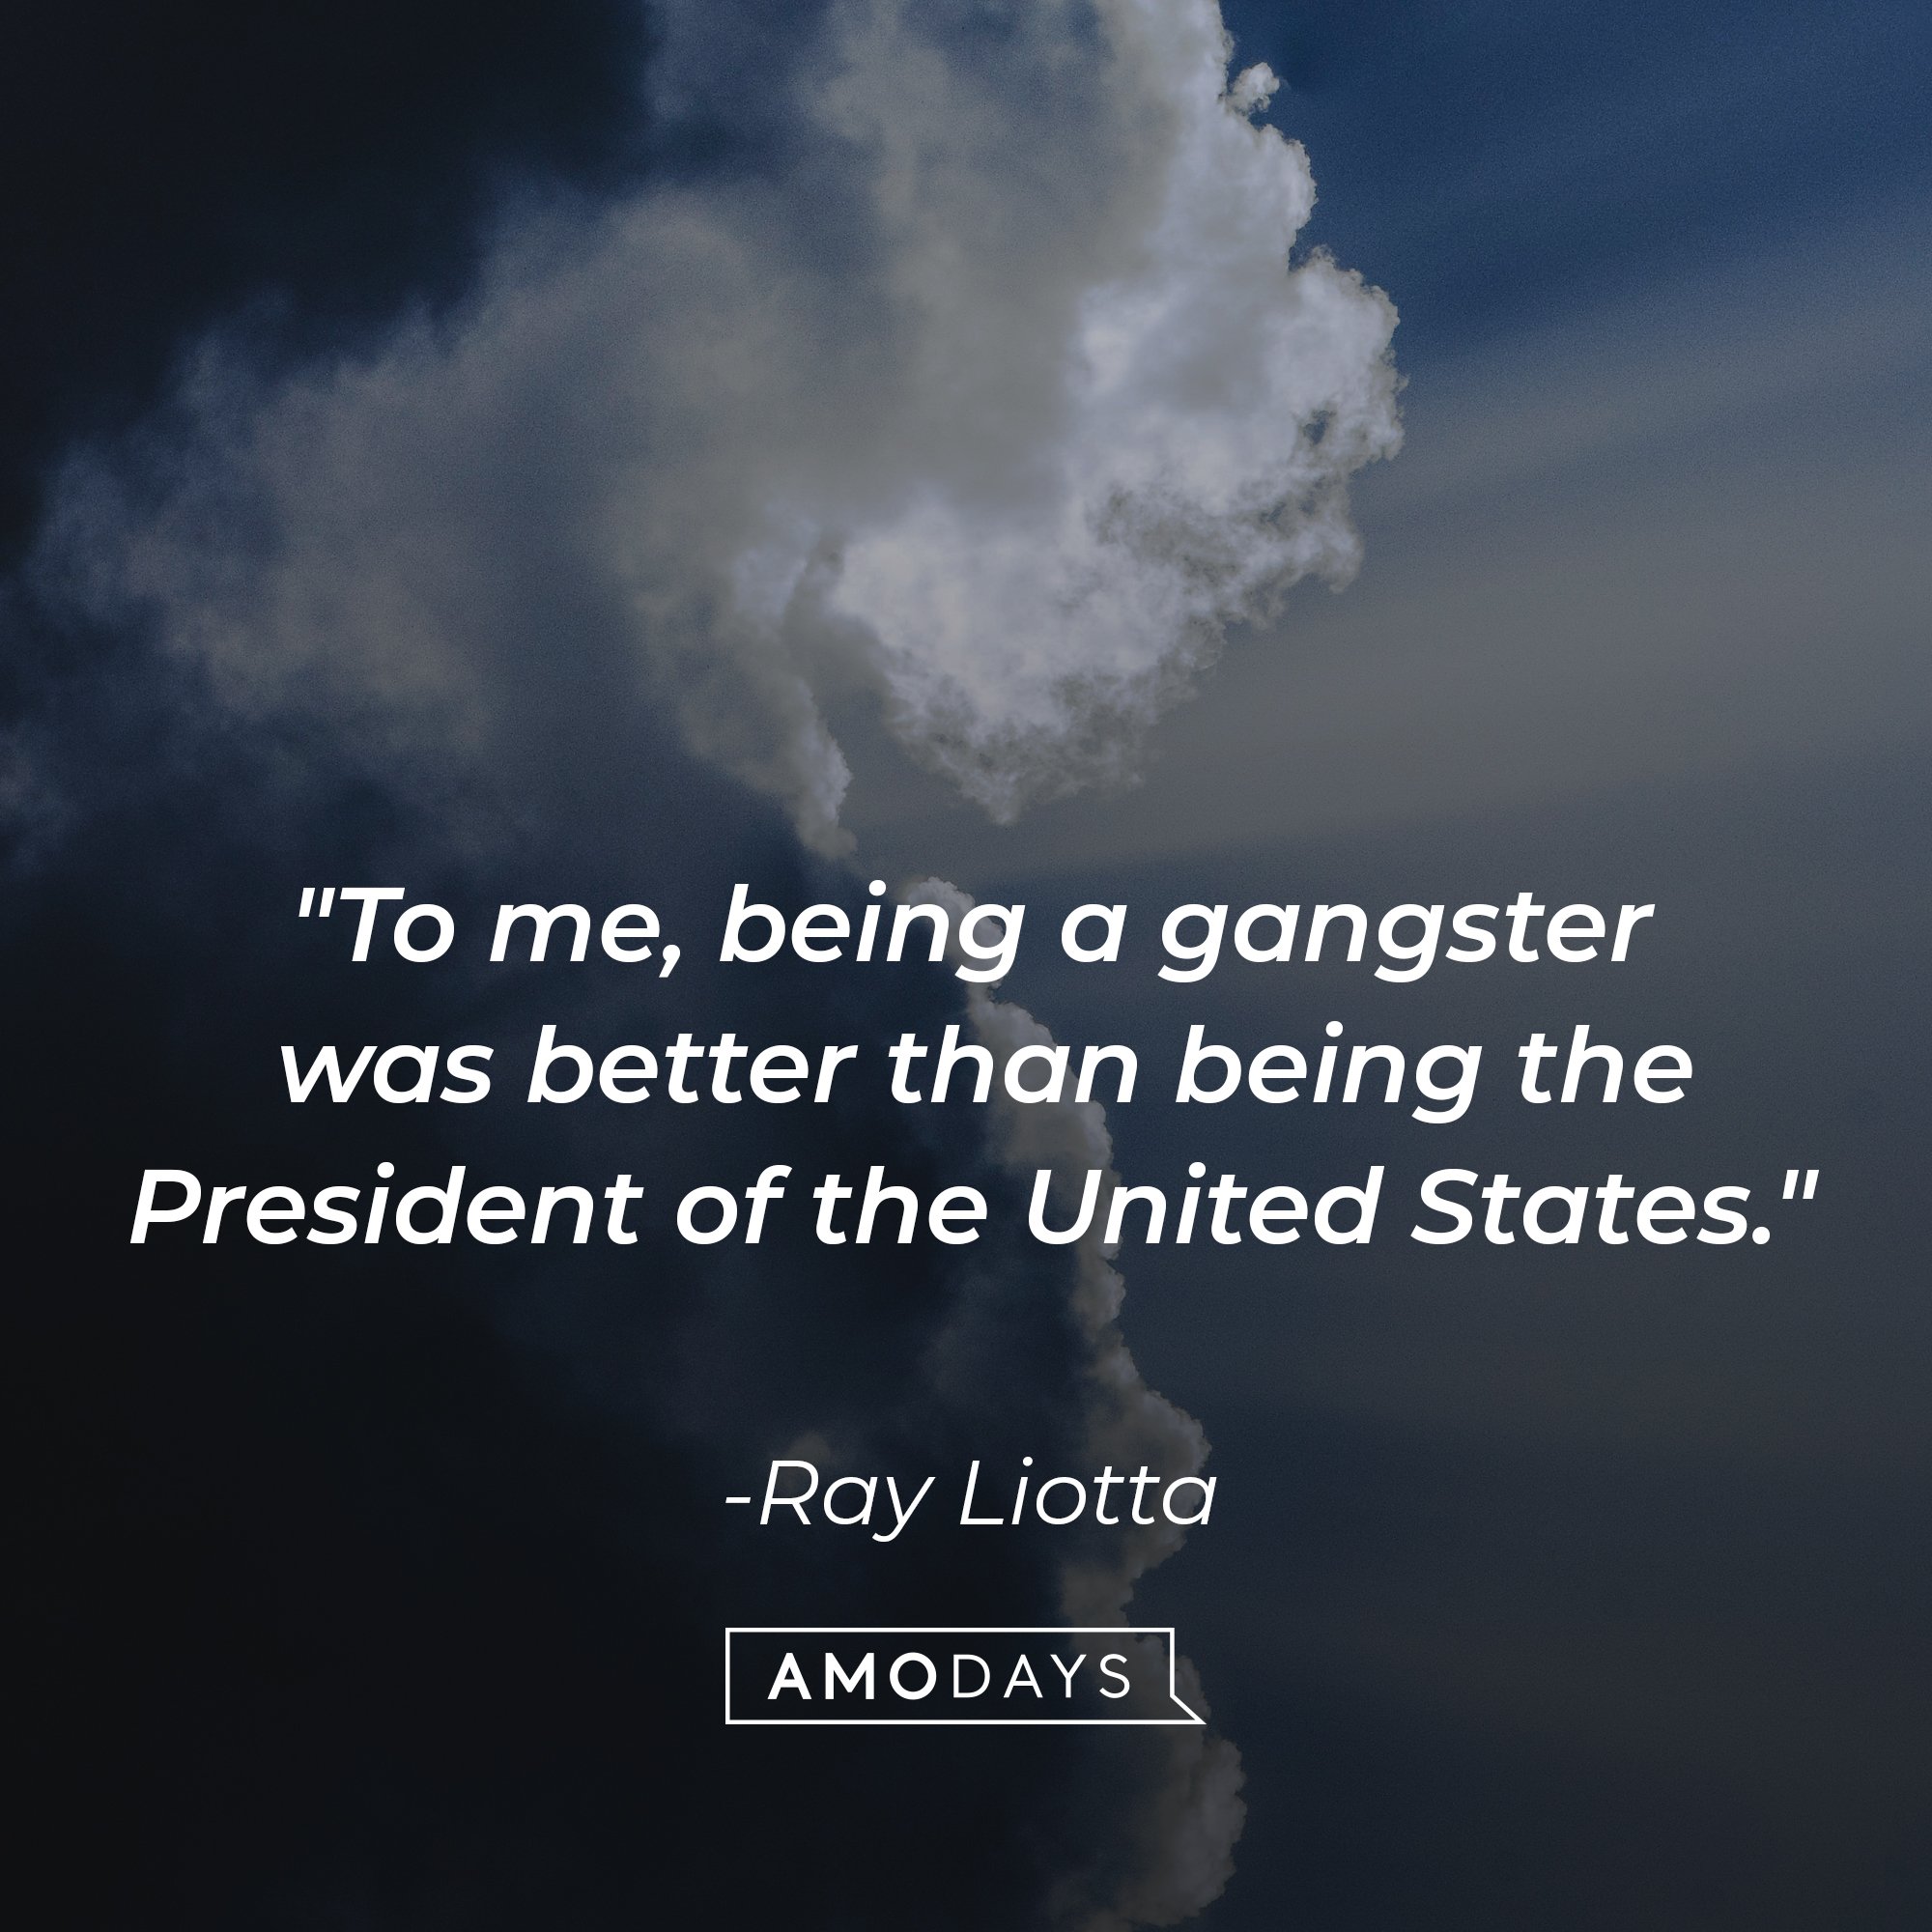 Ray Liotta’s quote: "To me, being a gangster was better than being the President of the United States." | Image: AmoDays